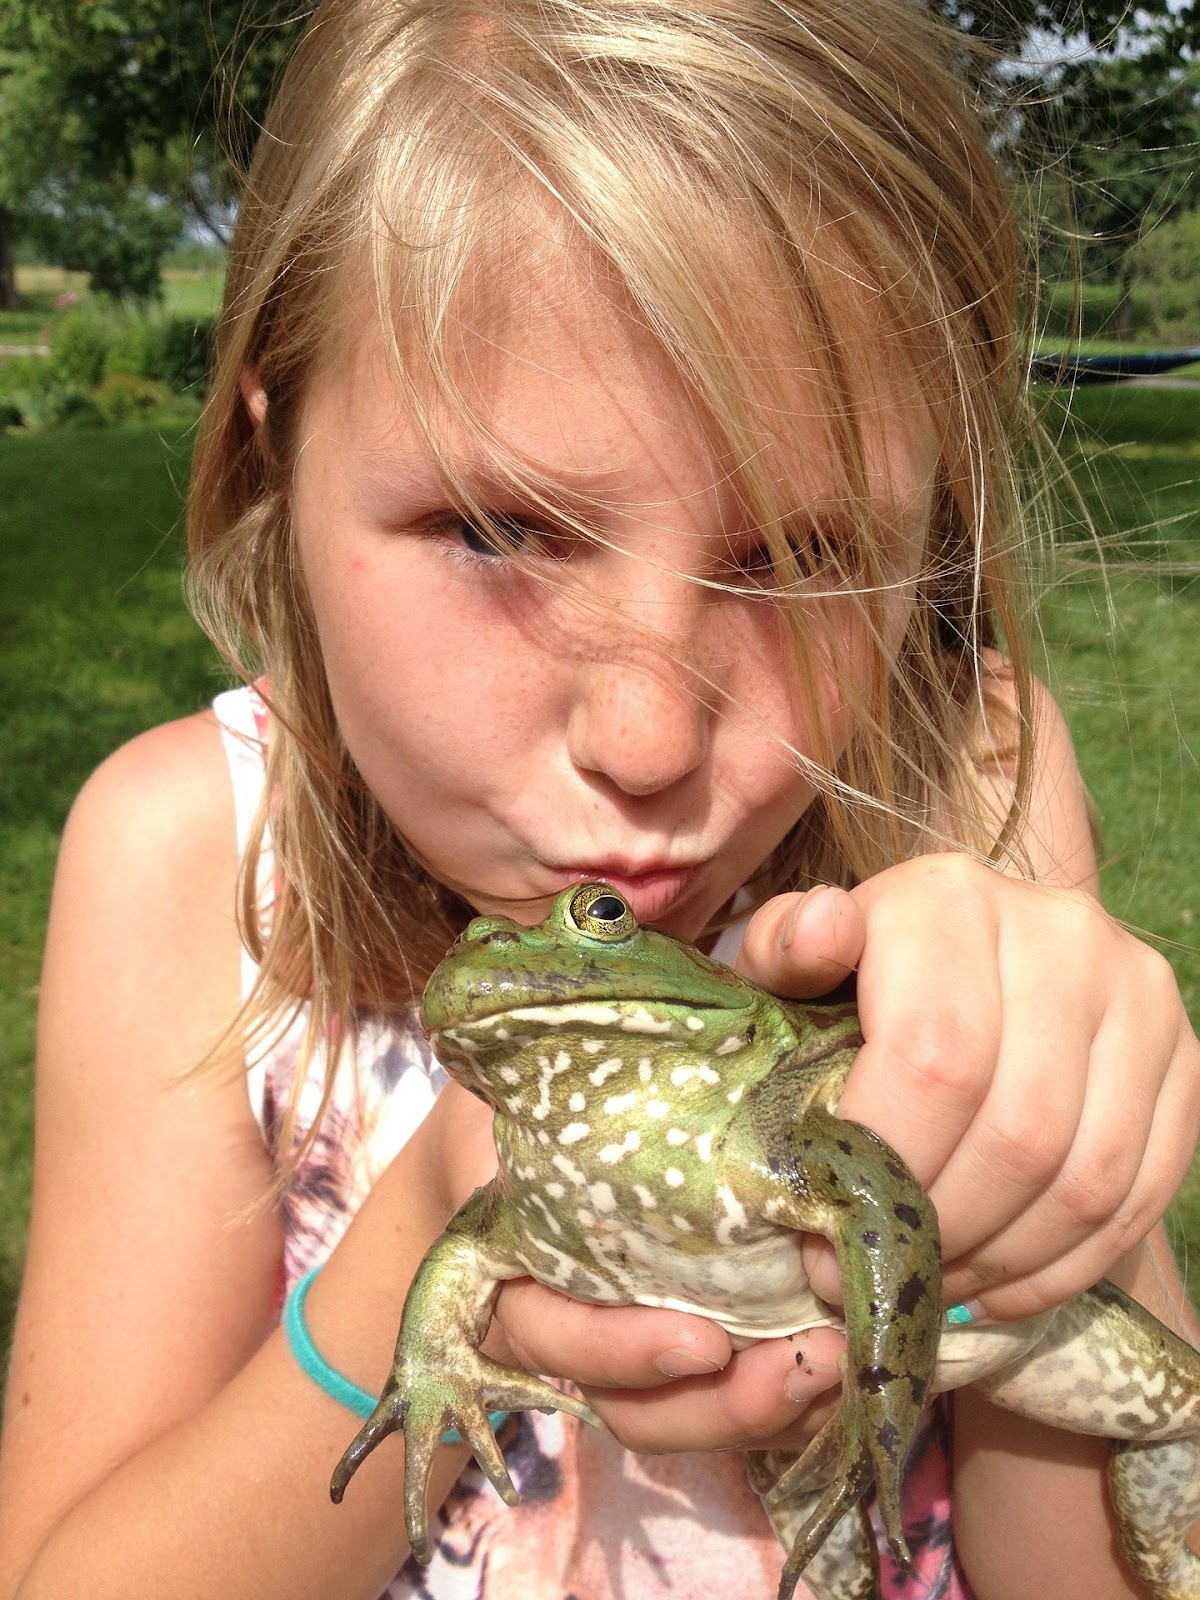 Young girl almost kissing frog